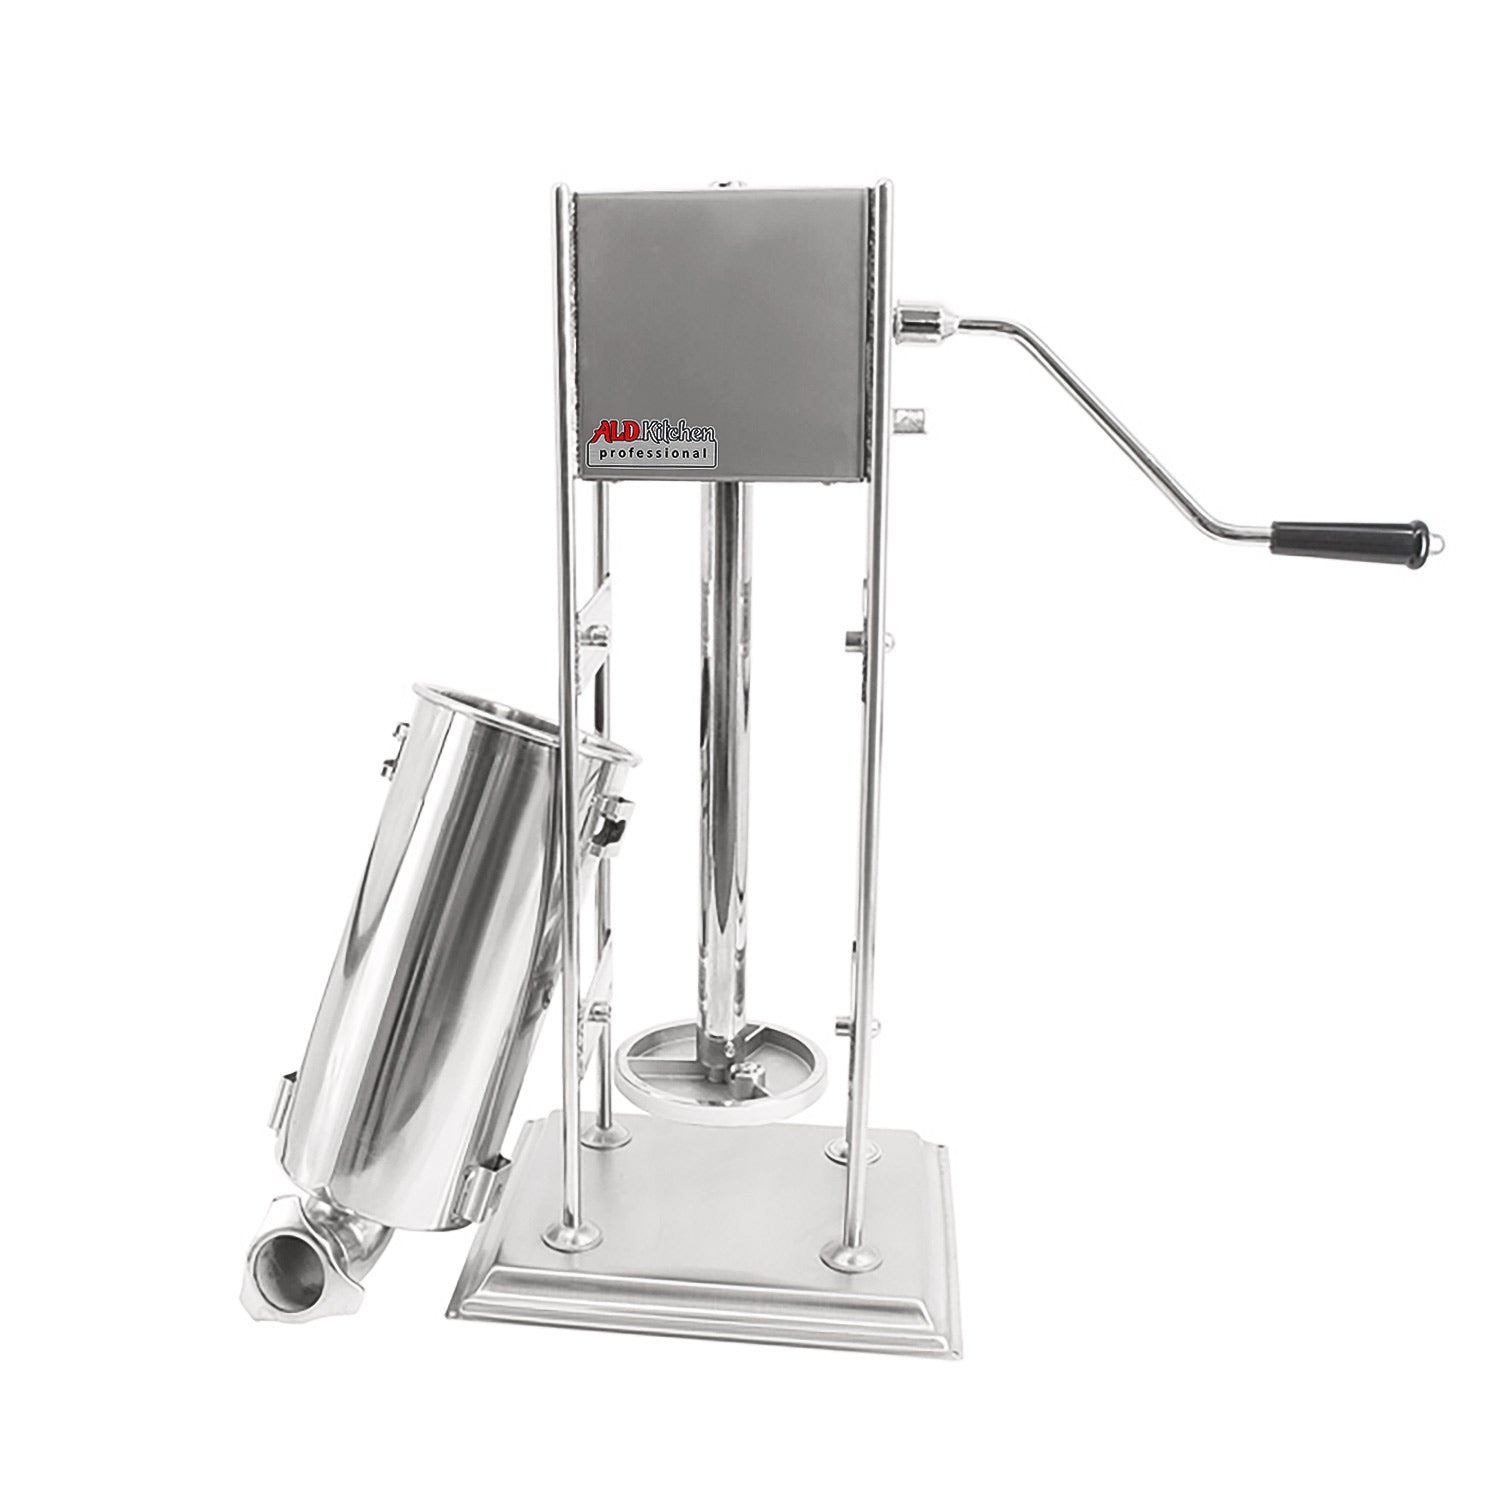 ALDKitchen Churros Machine | 3-Hole Nozzles | Manual Churro Maker with  L-Shape Working Stand | Churro Cutter | Stainless Steel (Churro + Deep  Fryer)